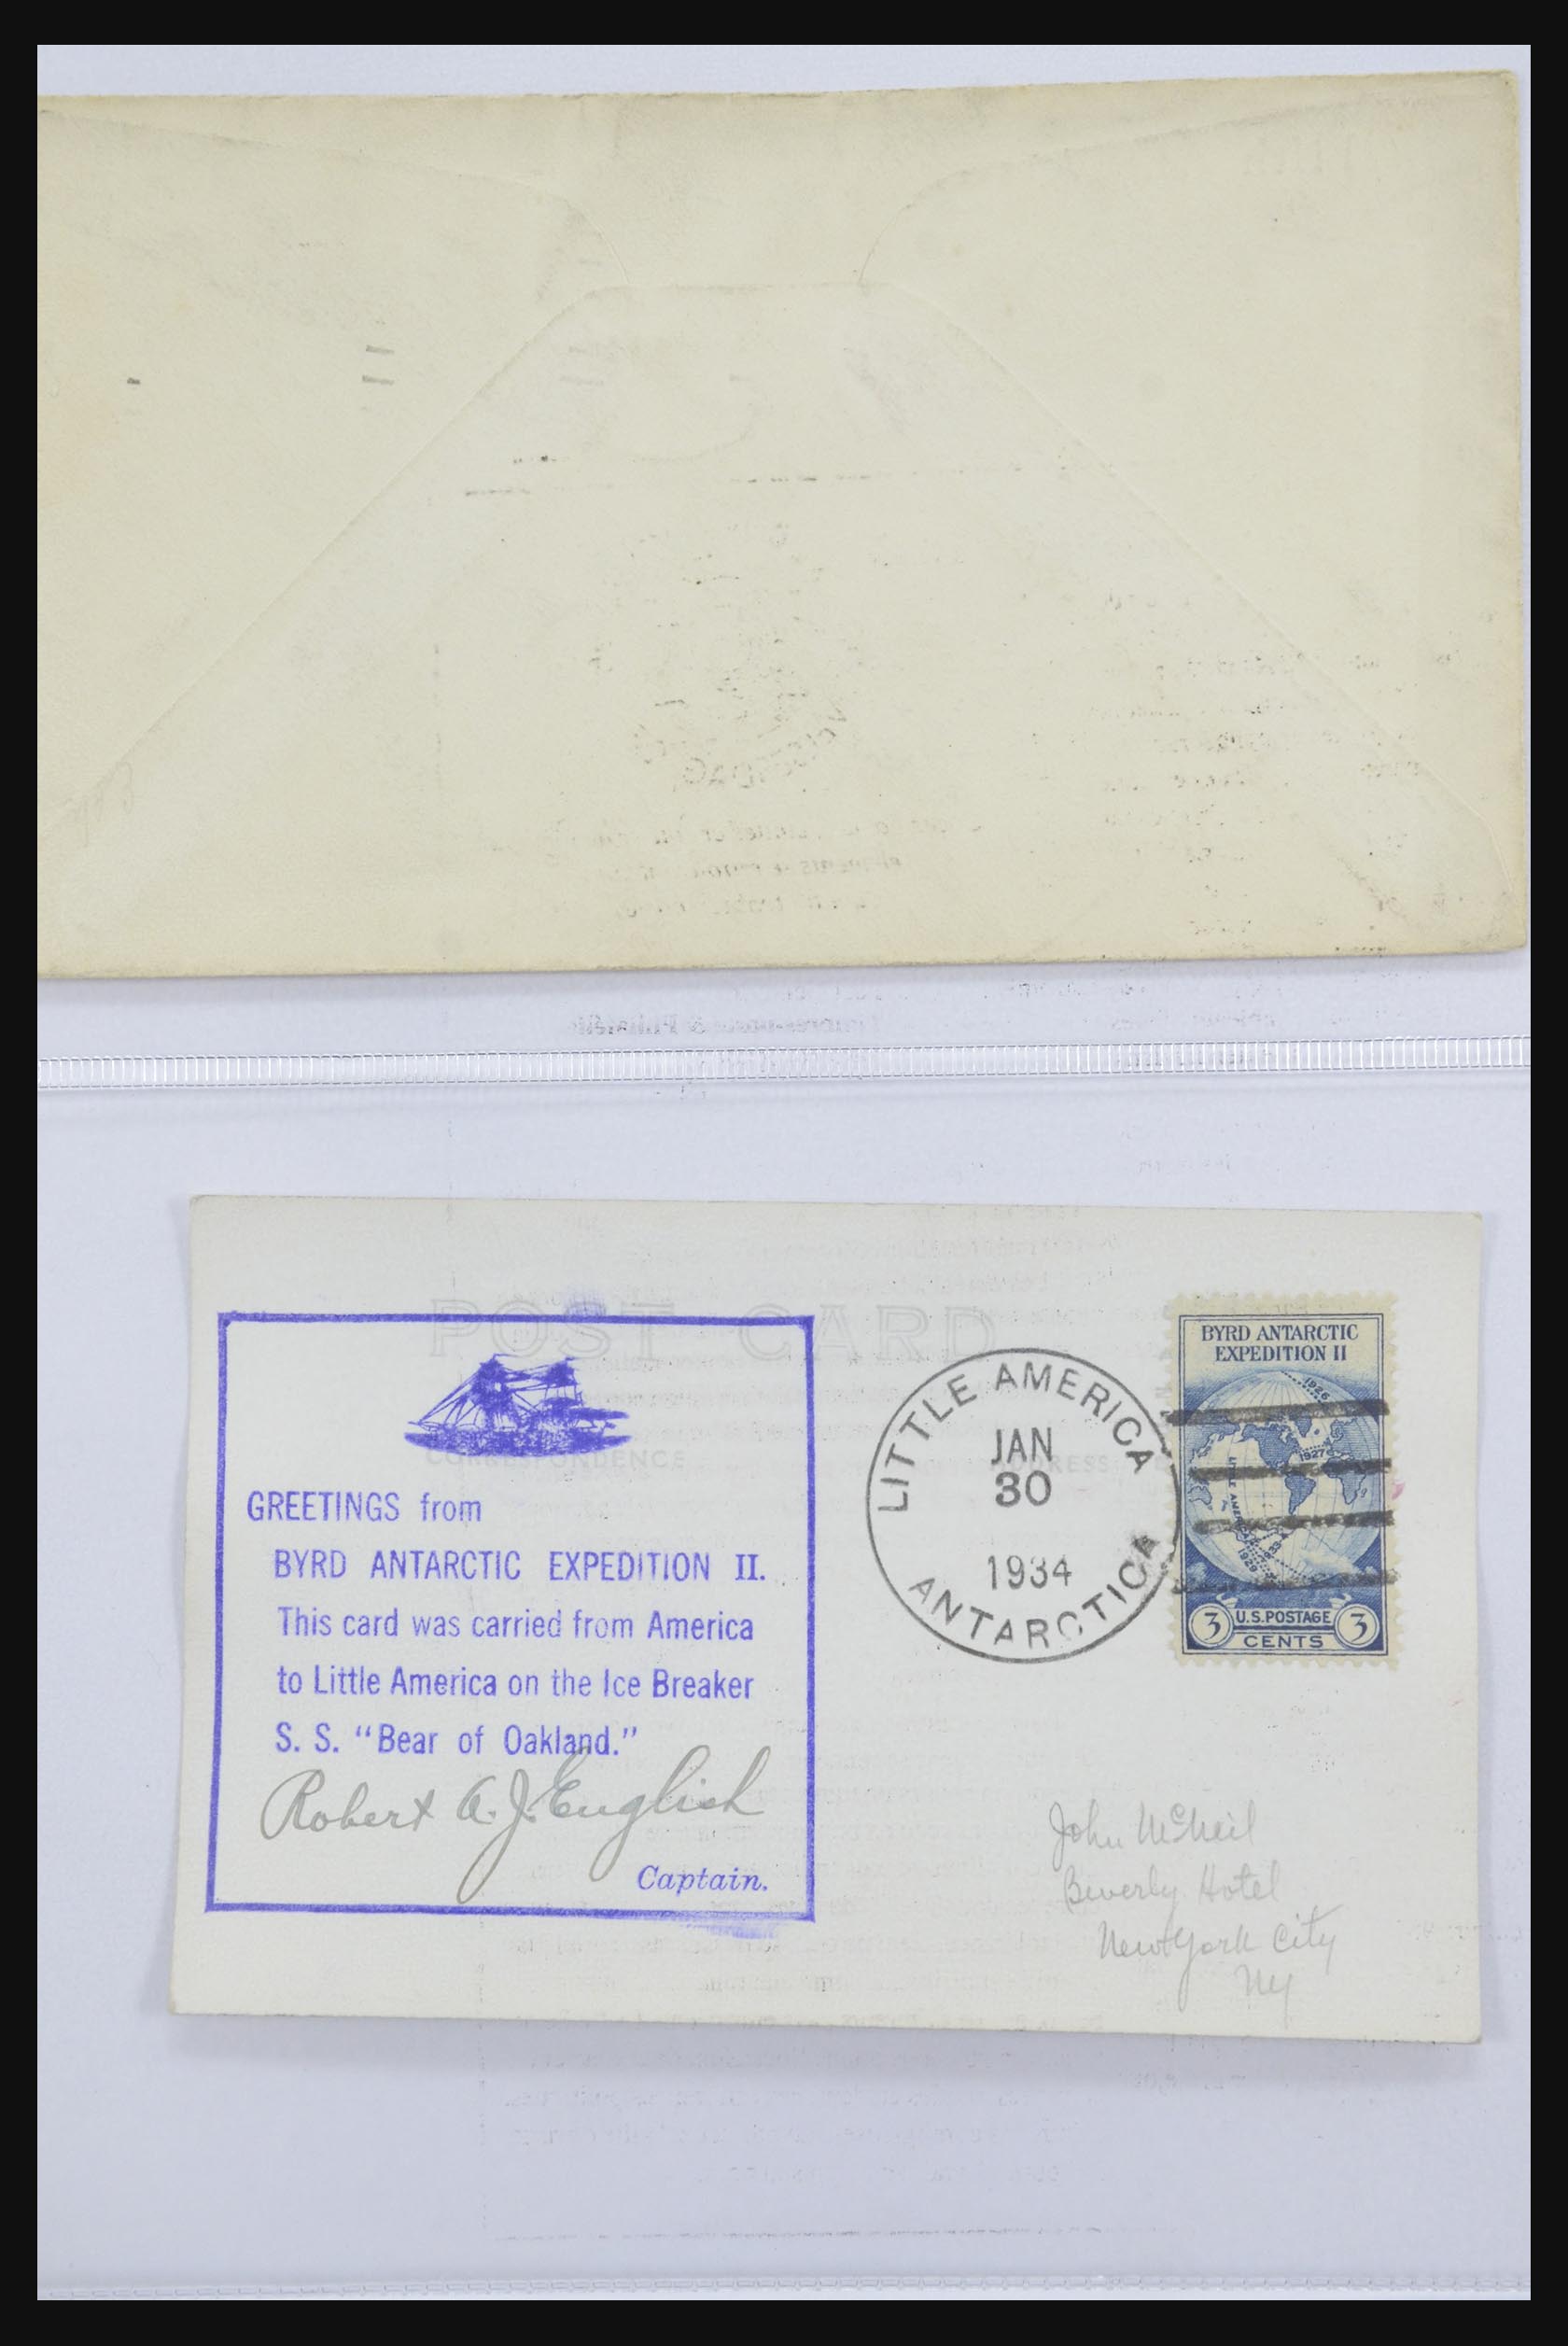 31627 038 - 31627 Byrd Antarctic Expedition 1934.